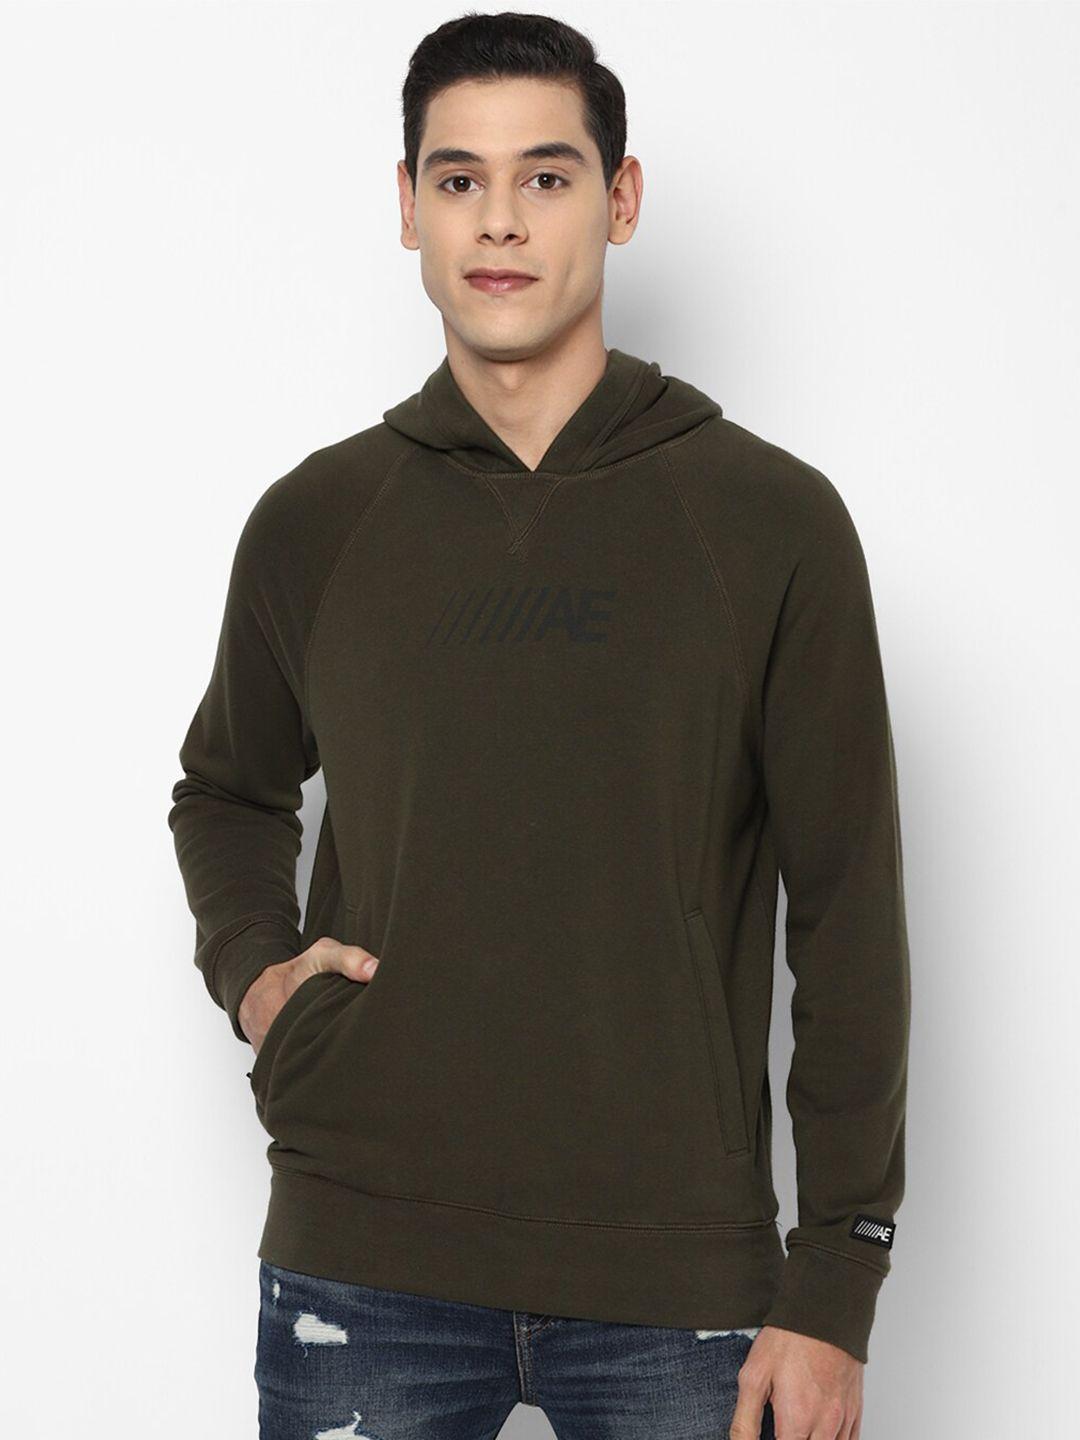 american eagle outfitters men olive green solid hooded sweatshirt with logo detail